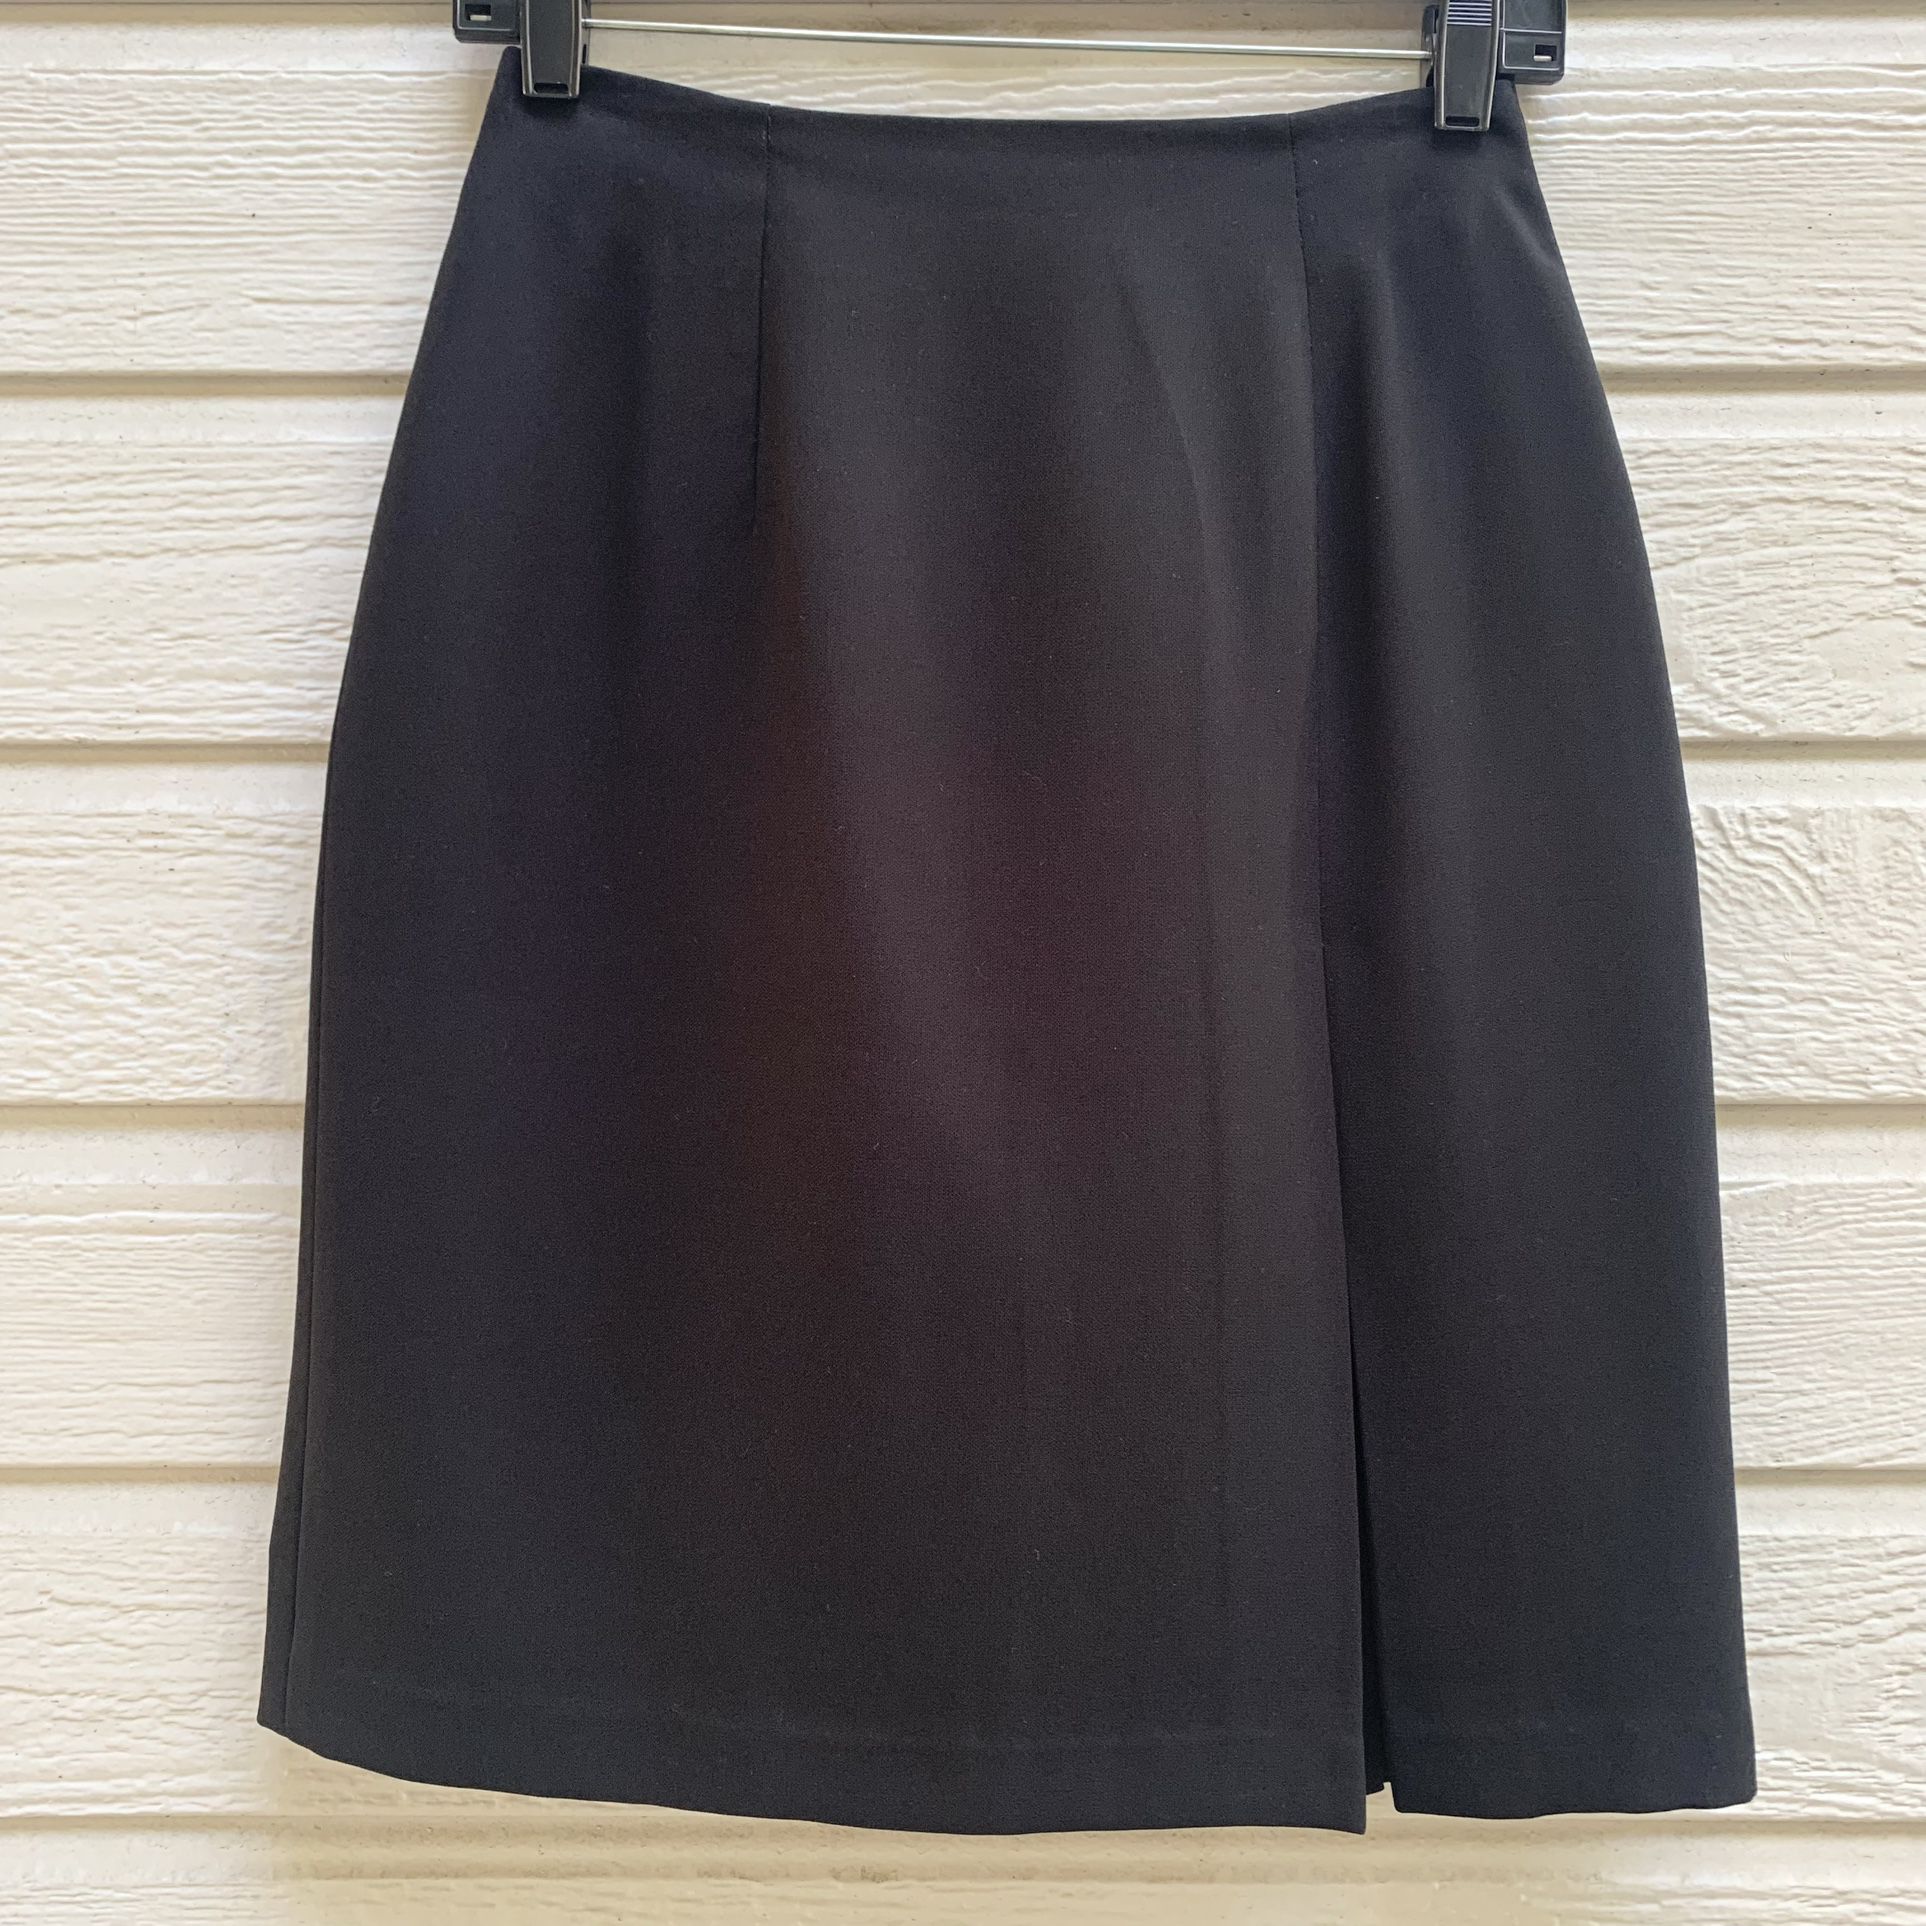 Black Knee Length Skirt with Front Side Slit - Small